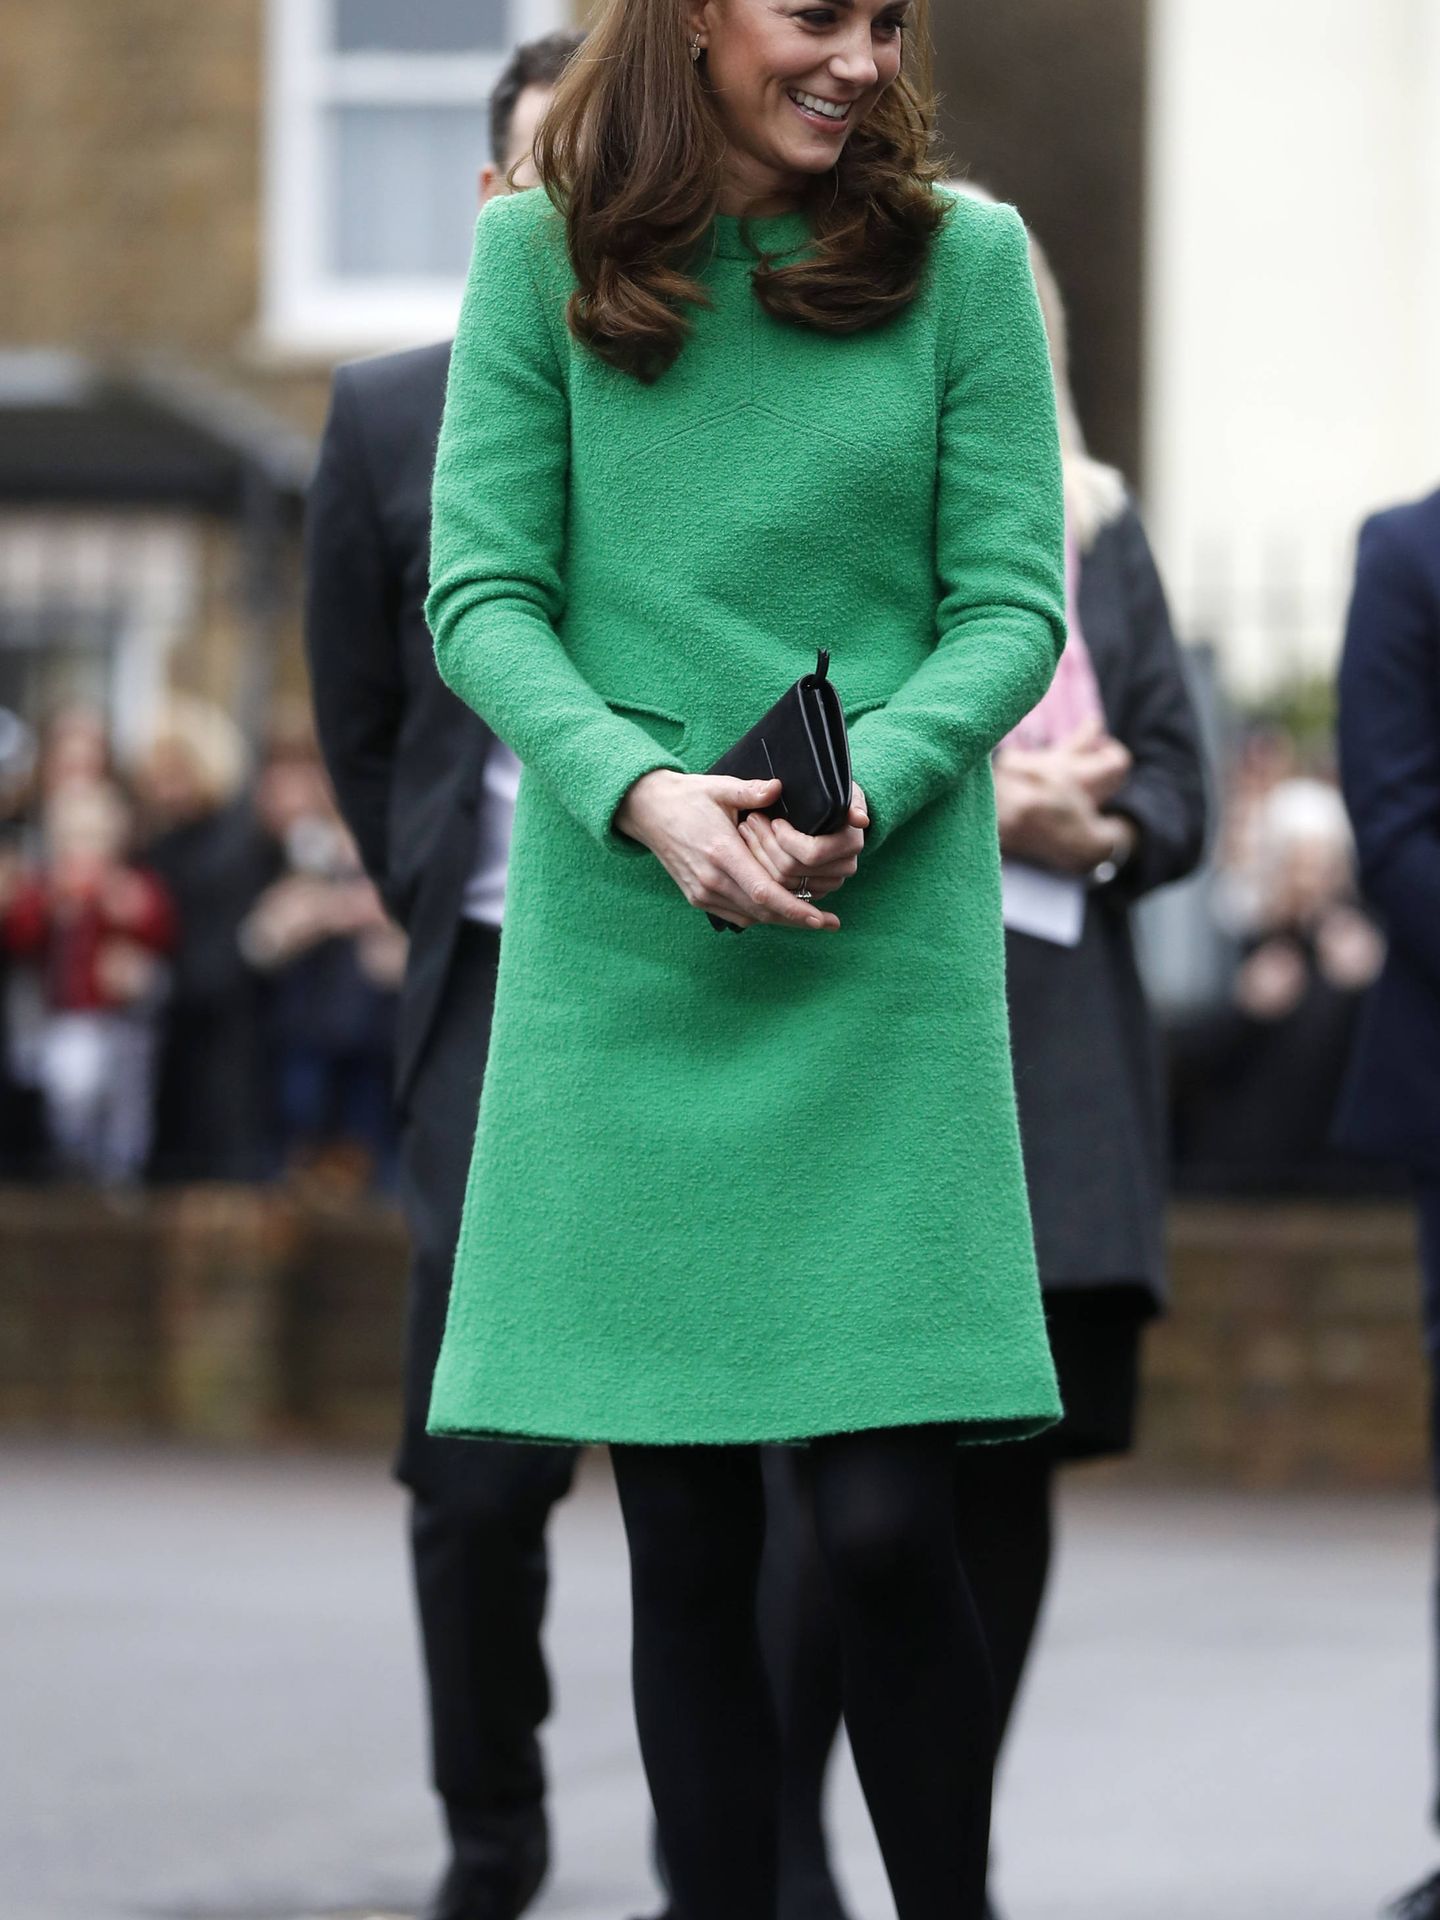 Look completo de Kate Middleton. (Getty)